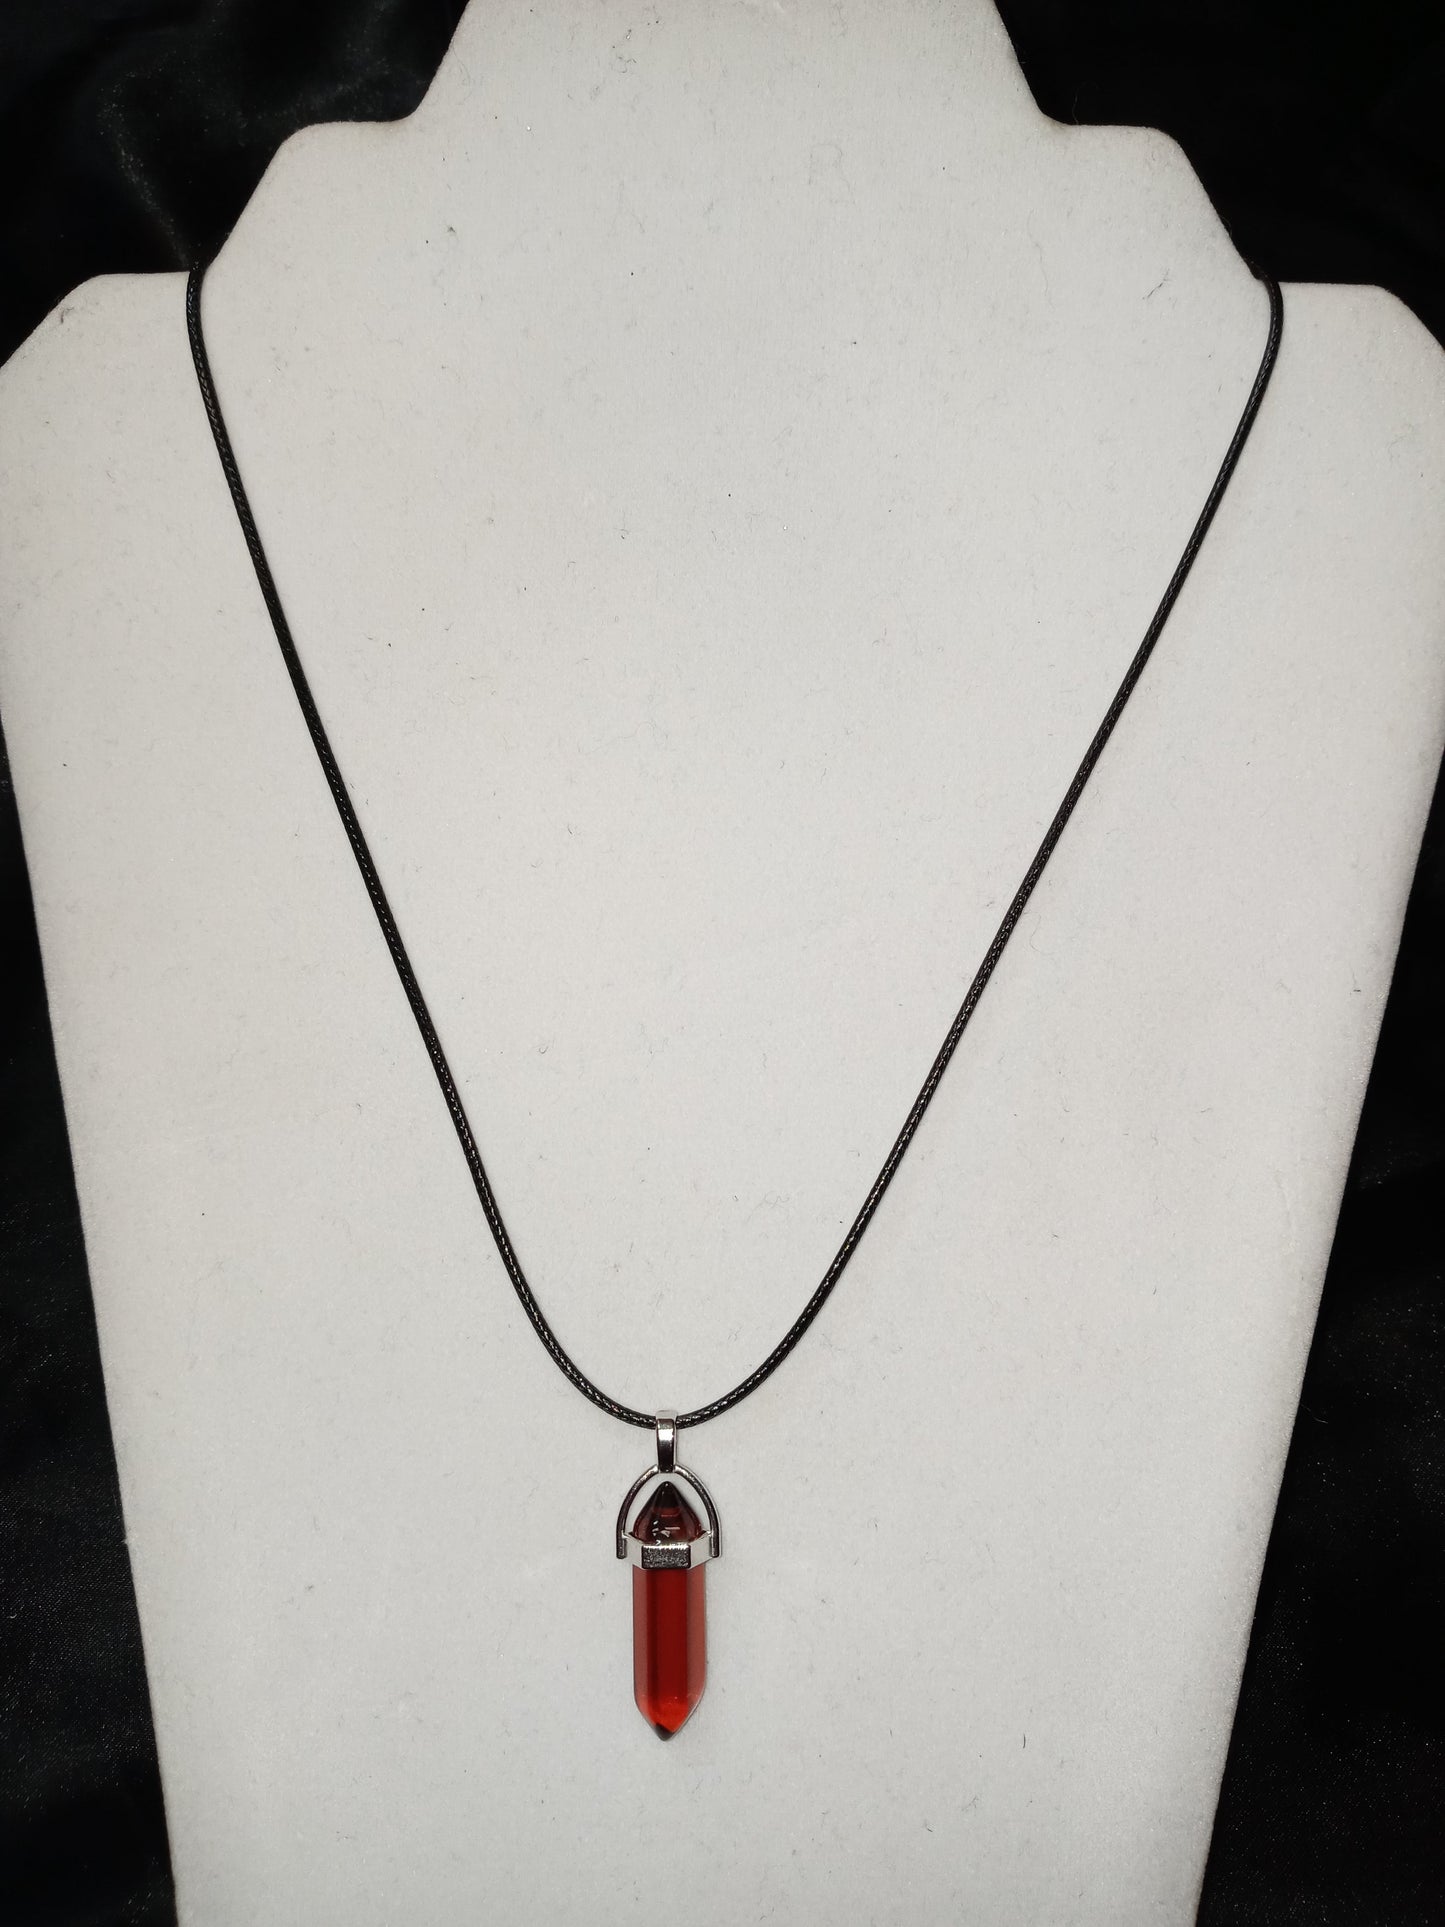 Bullet Shape Healing Stones with Black Paracord Necklace - Red Agate